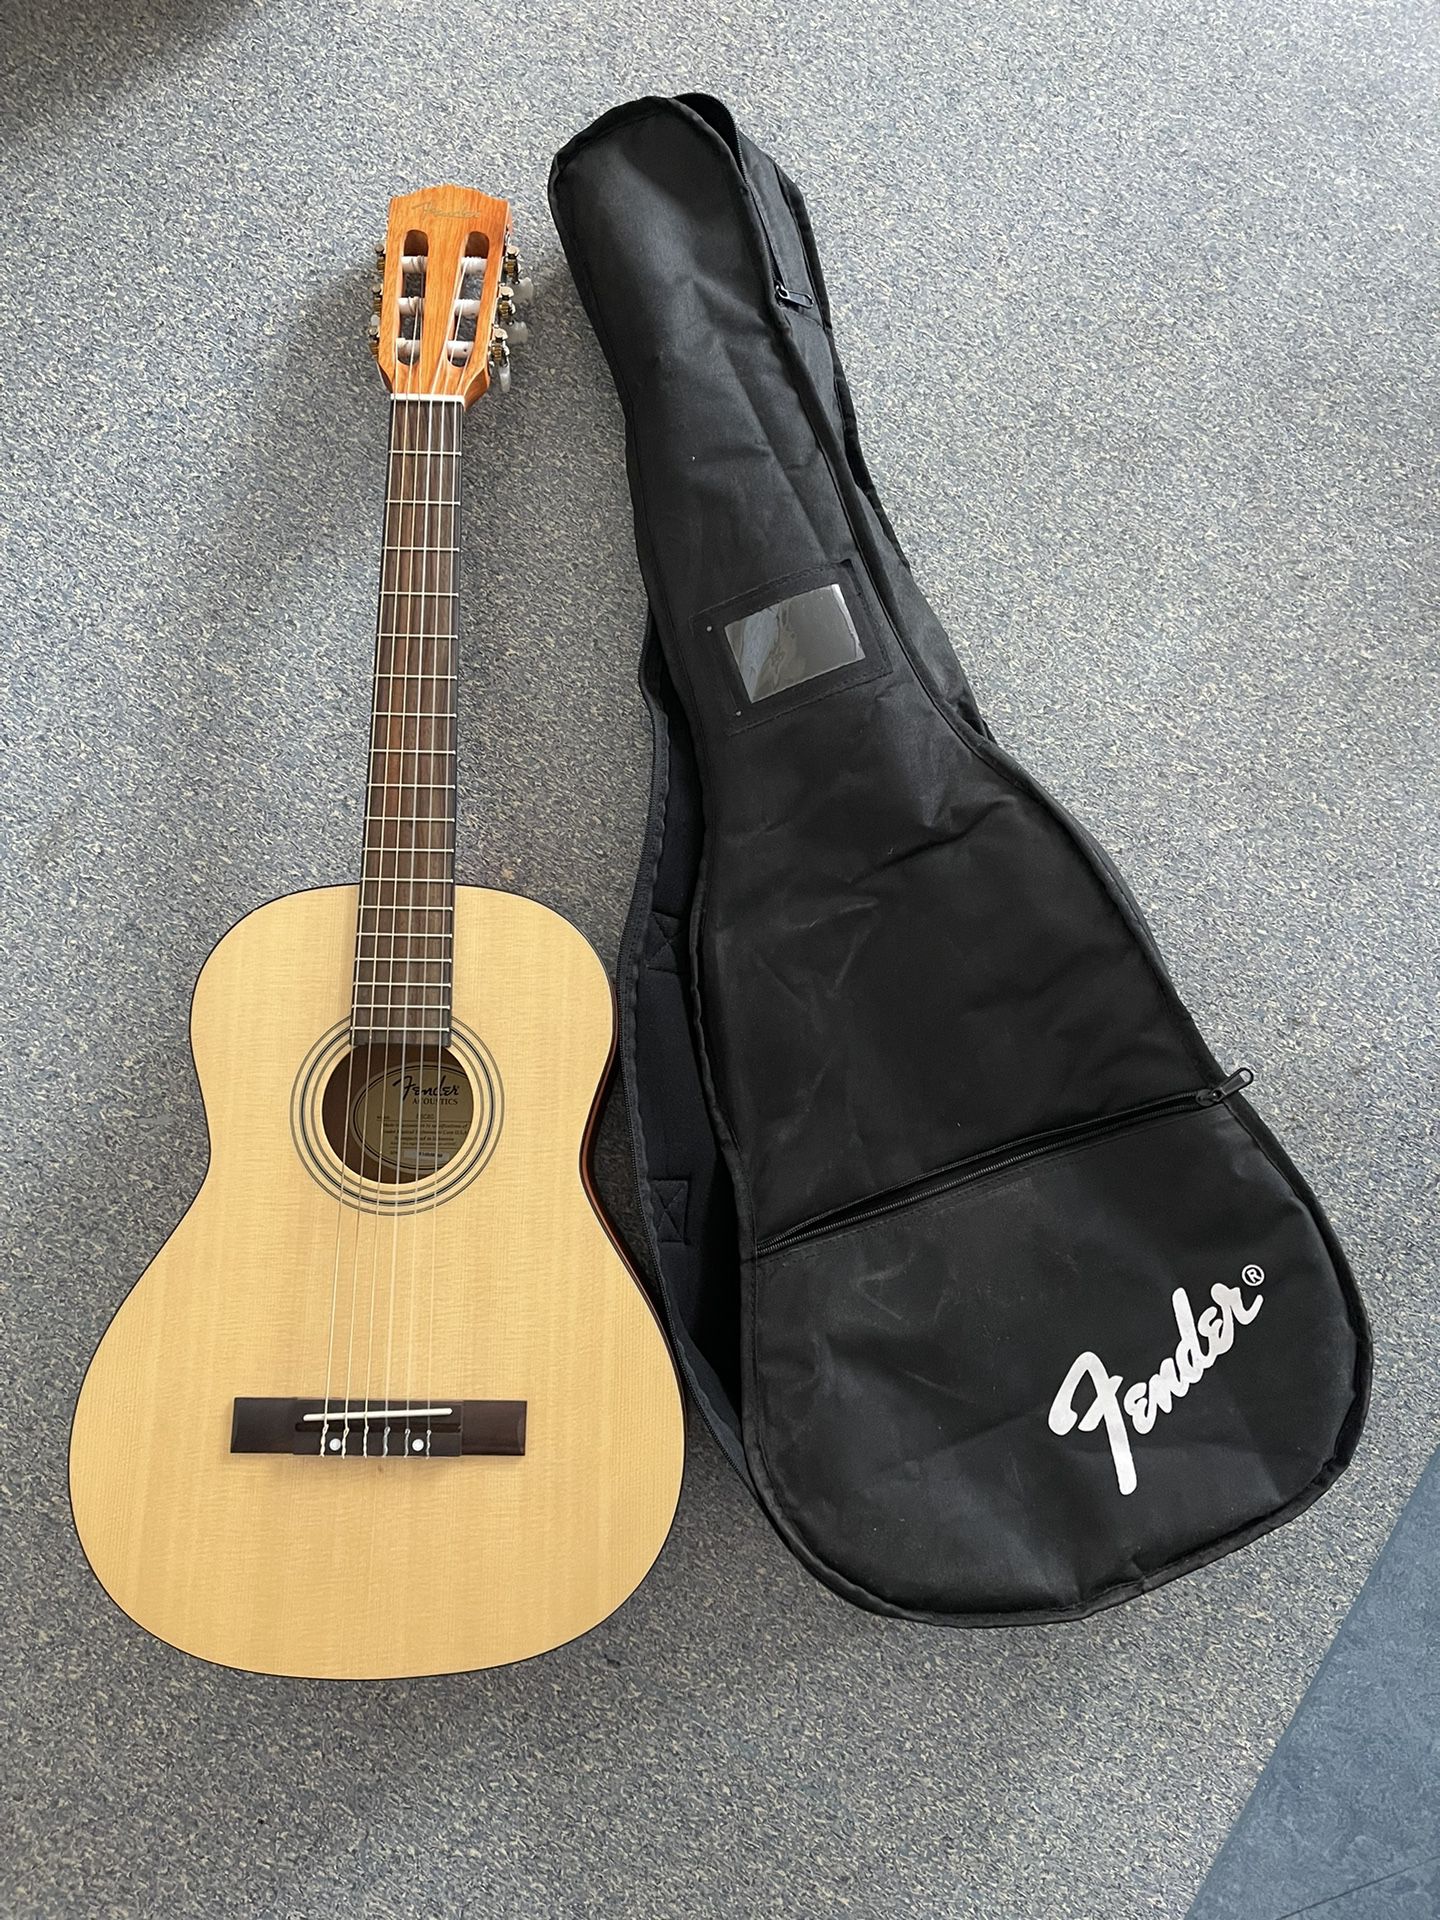 Brand New Fender Kid Size Guitar With Carrying Case